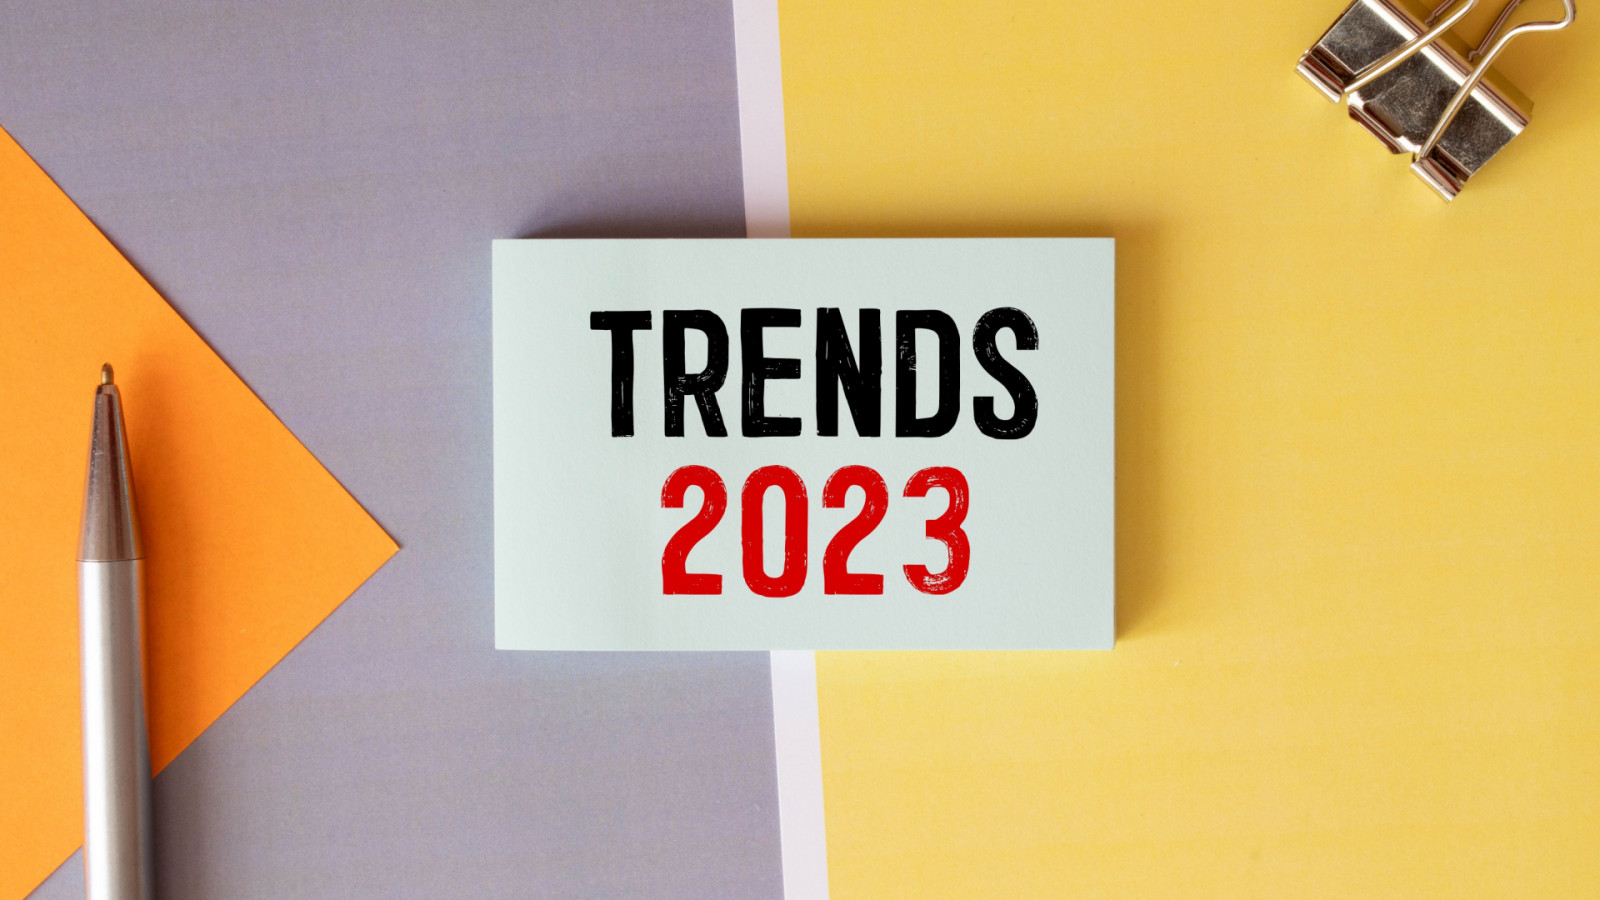 B2B PR trends in the UK for 2023.